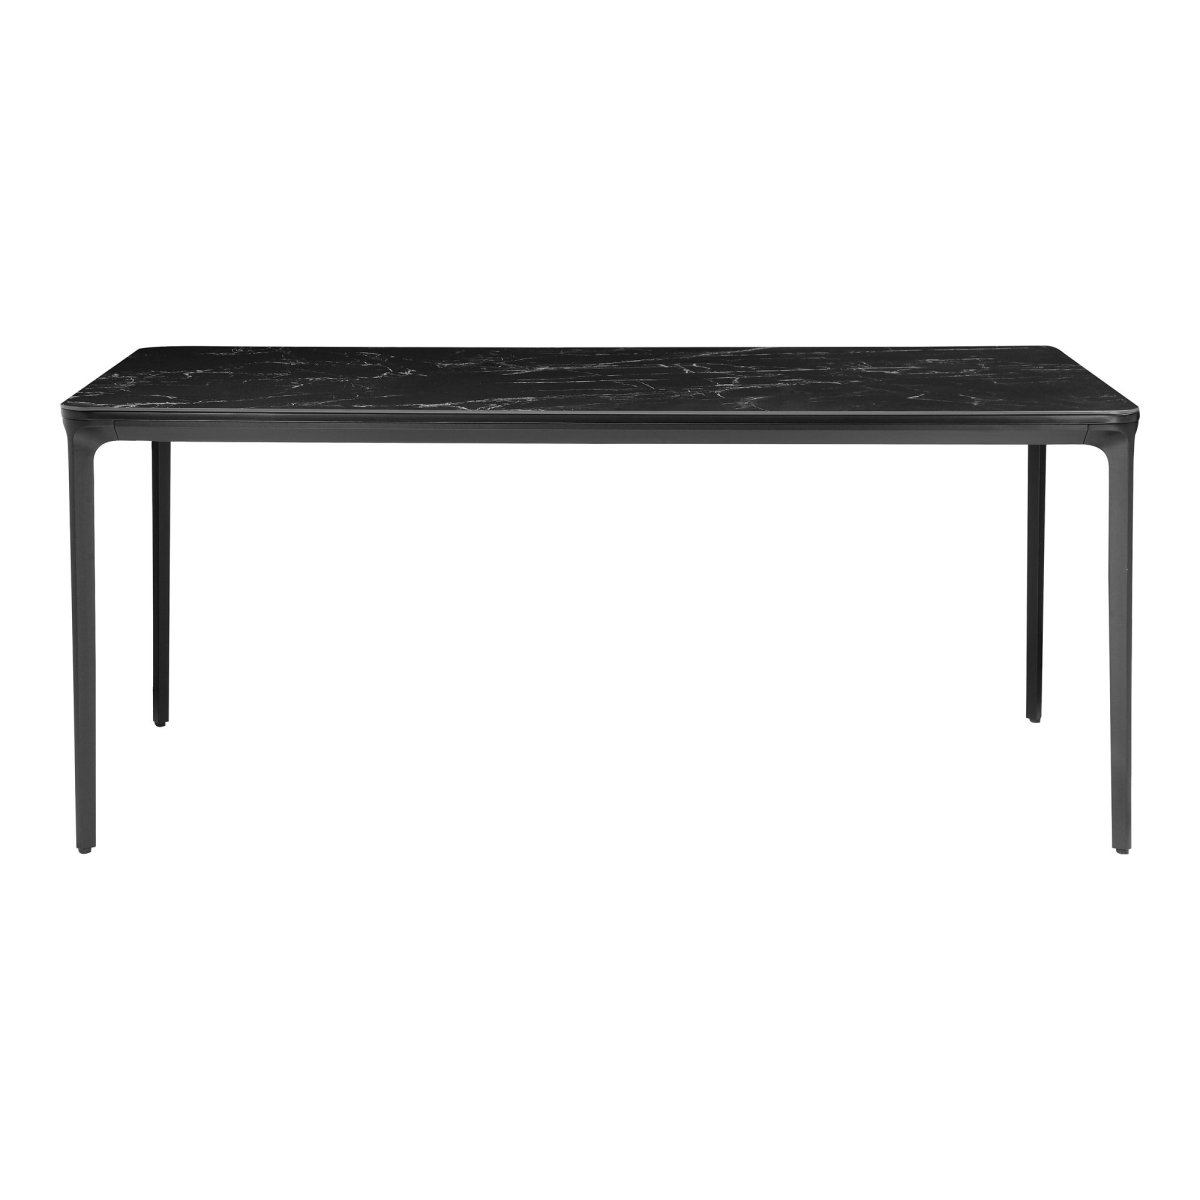 Er-2088-07 70.5 X 35 X 29.5 In. Medici Dining Table